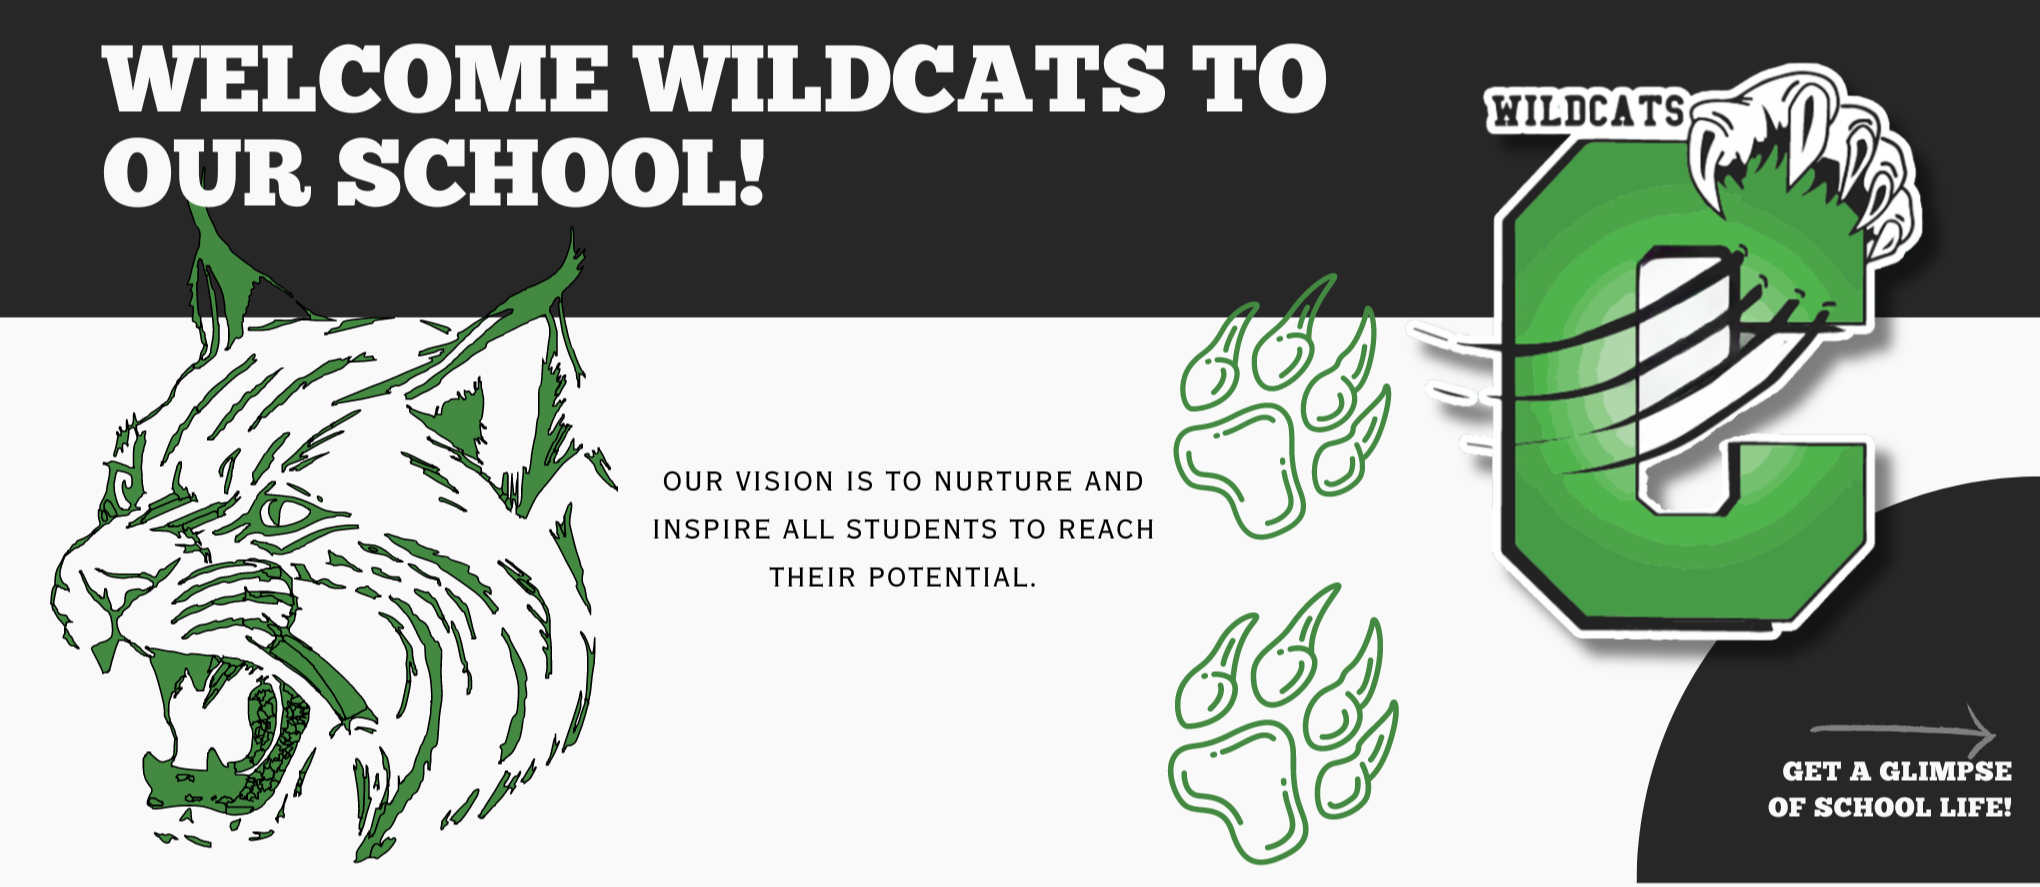 Welcome Wildcats to our school!